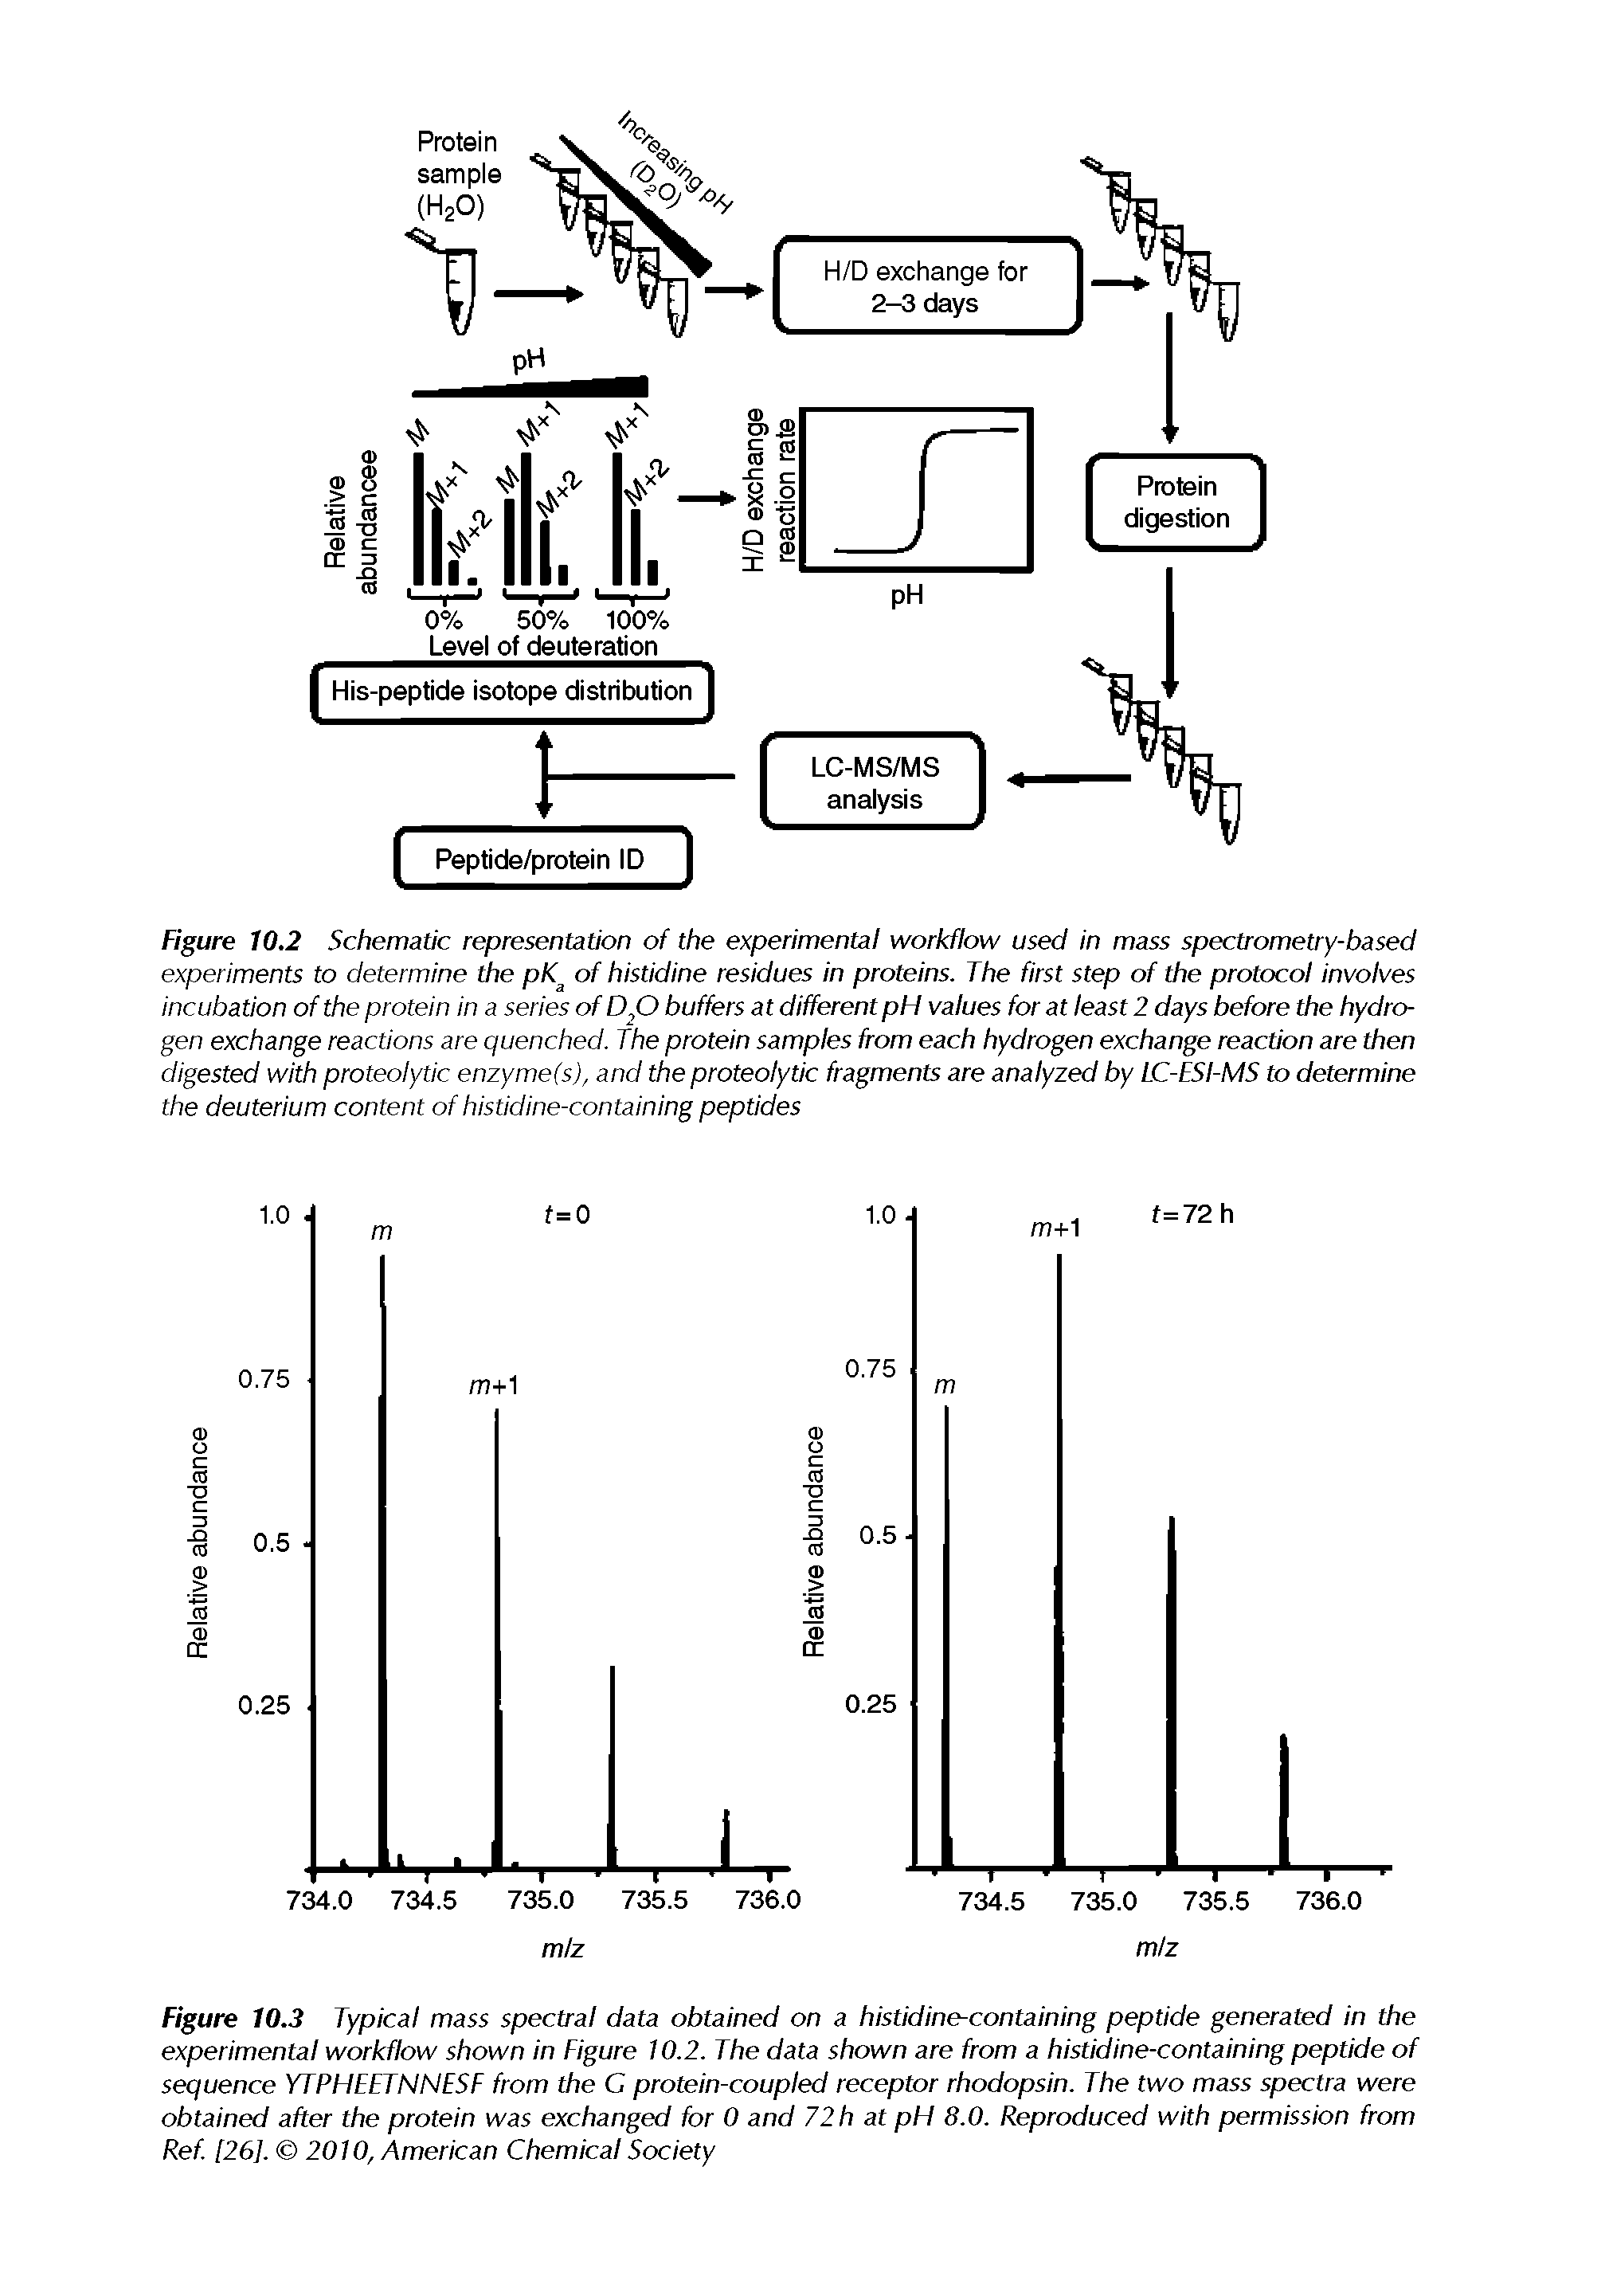 Figure 10.2 Schematic representation of the experimental workflow used in mass spectrometry-based experiments to determine the pK of histidine residues in proteins. The first step of the protocol involves incubation of the protein in a series of D,0 buffers at different pH values for at least 2 days before the hydrogen exchange reactions are quenched. The protein samples from each hydrogen exchange reaction are then digested with proteolytic enzyme(s), and the proteolytic fragments are analyzed by LC-TSI-MS to determine the deuterium content cjf histidine-ccjntaining peptides...